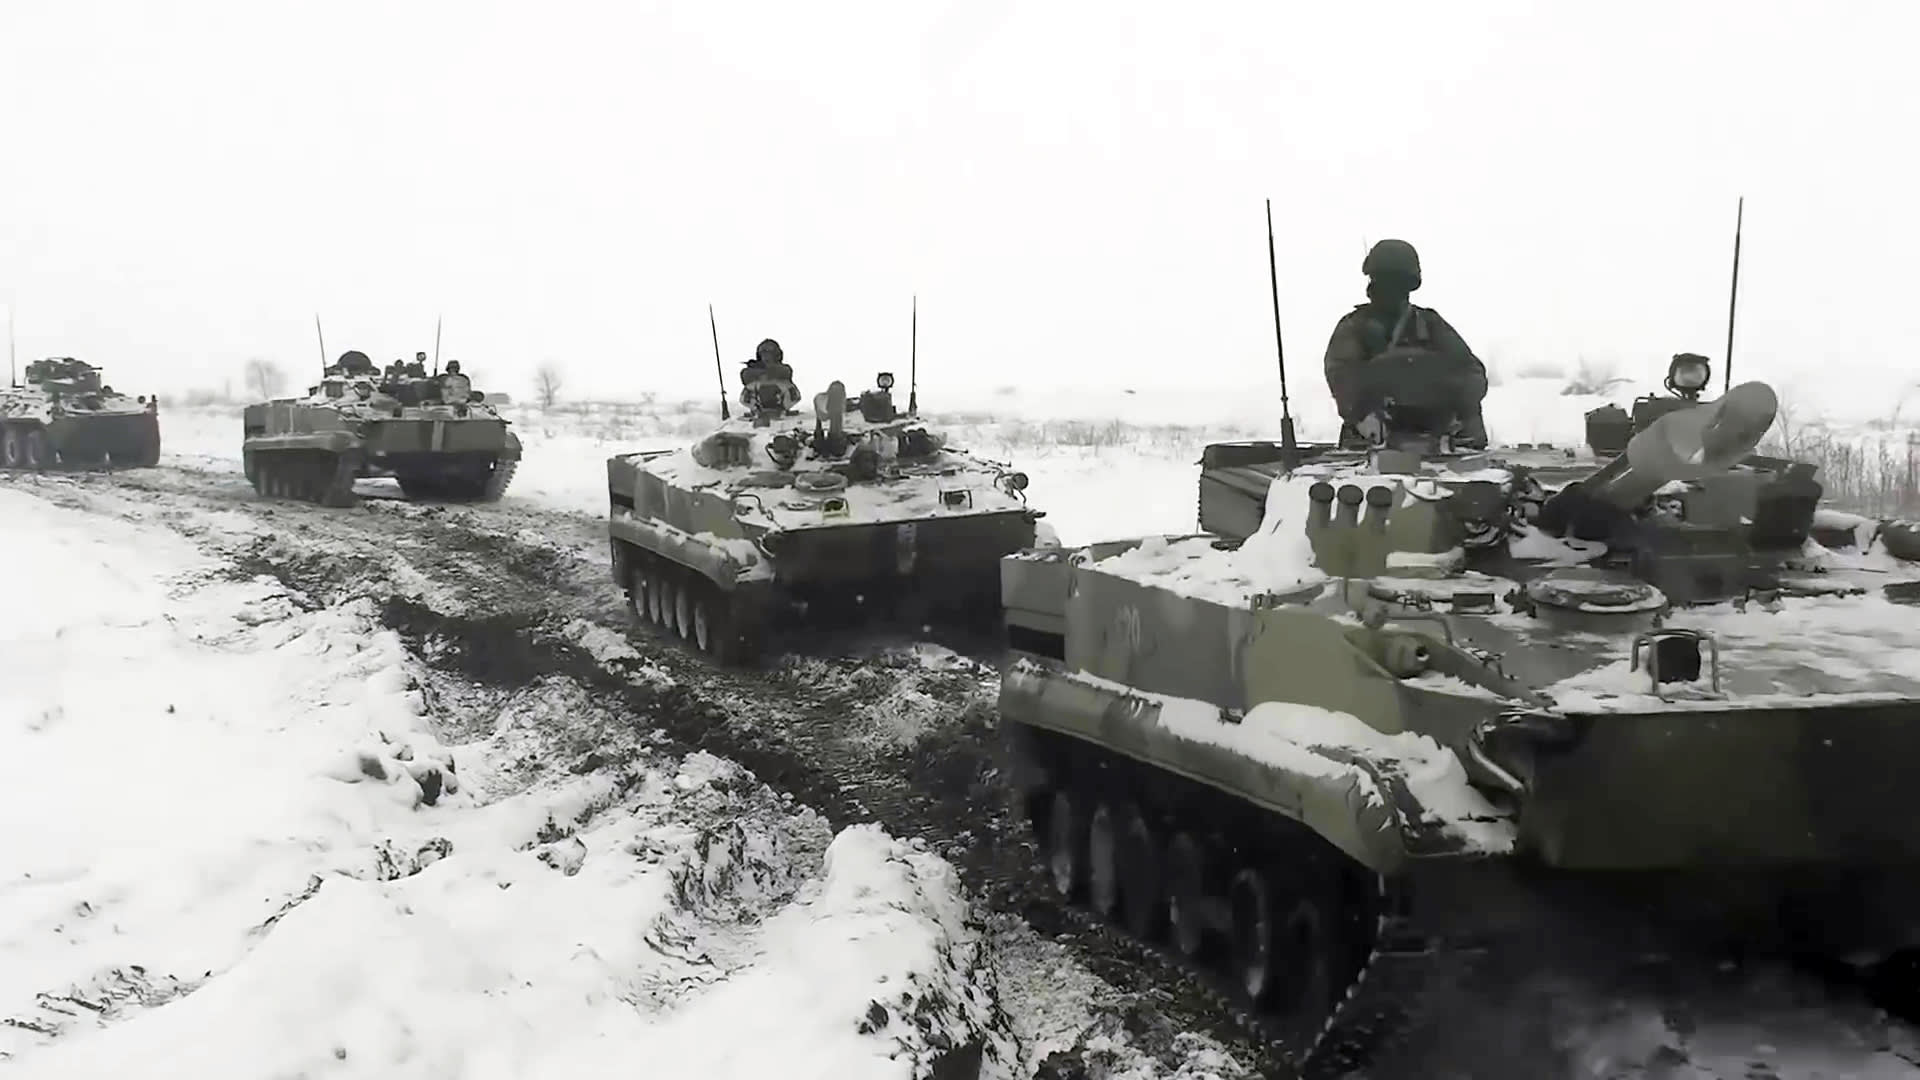 A screen grab captured from a video shows military units of the Southern Military District of Russia are on their way to a training site in the south of the country, for military exercises in Rostov, Russia on January 26, 2022.